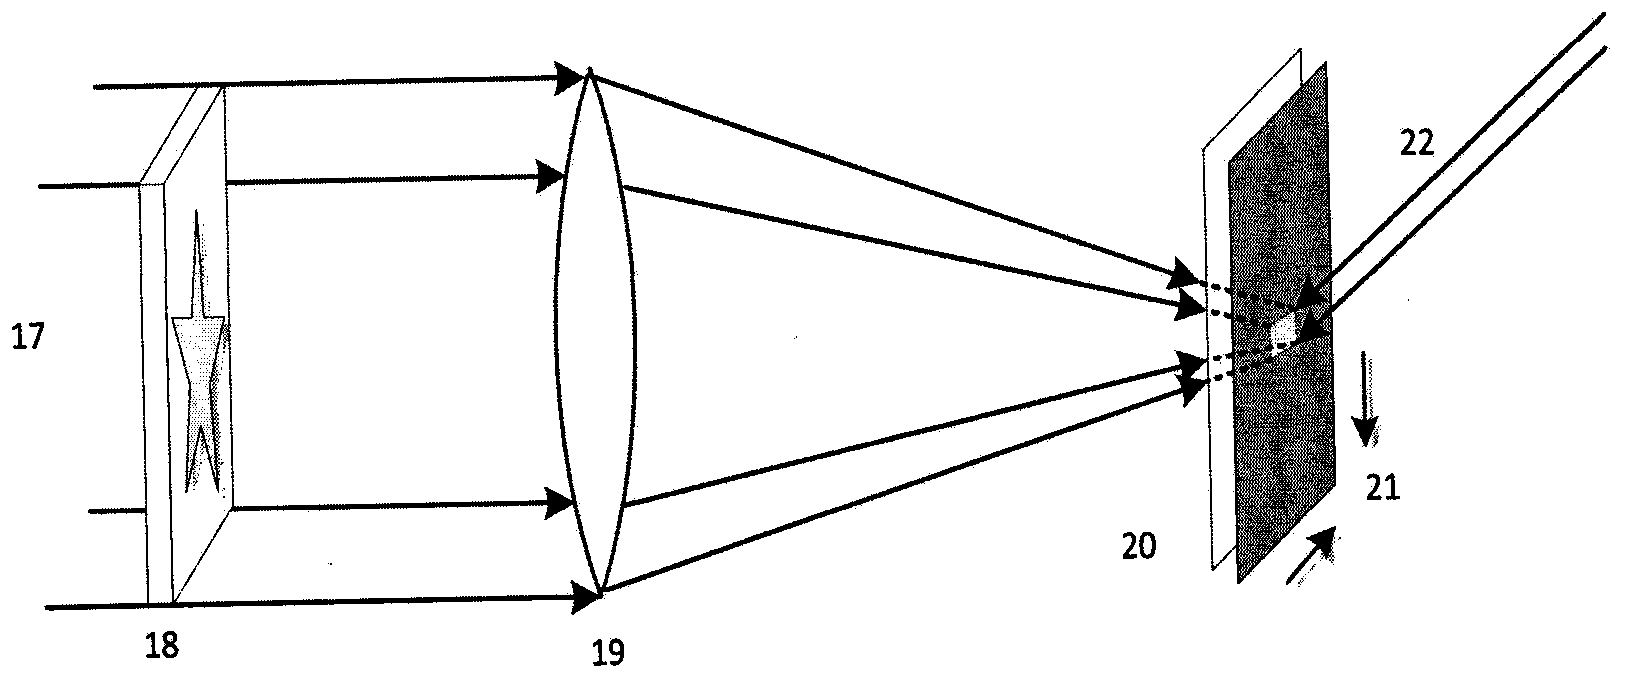 Monochrome full-parallax holographic three-dimensional one-step printer light path structure